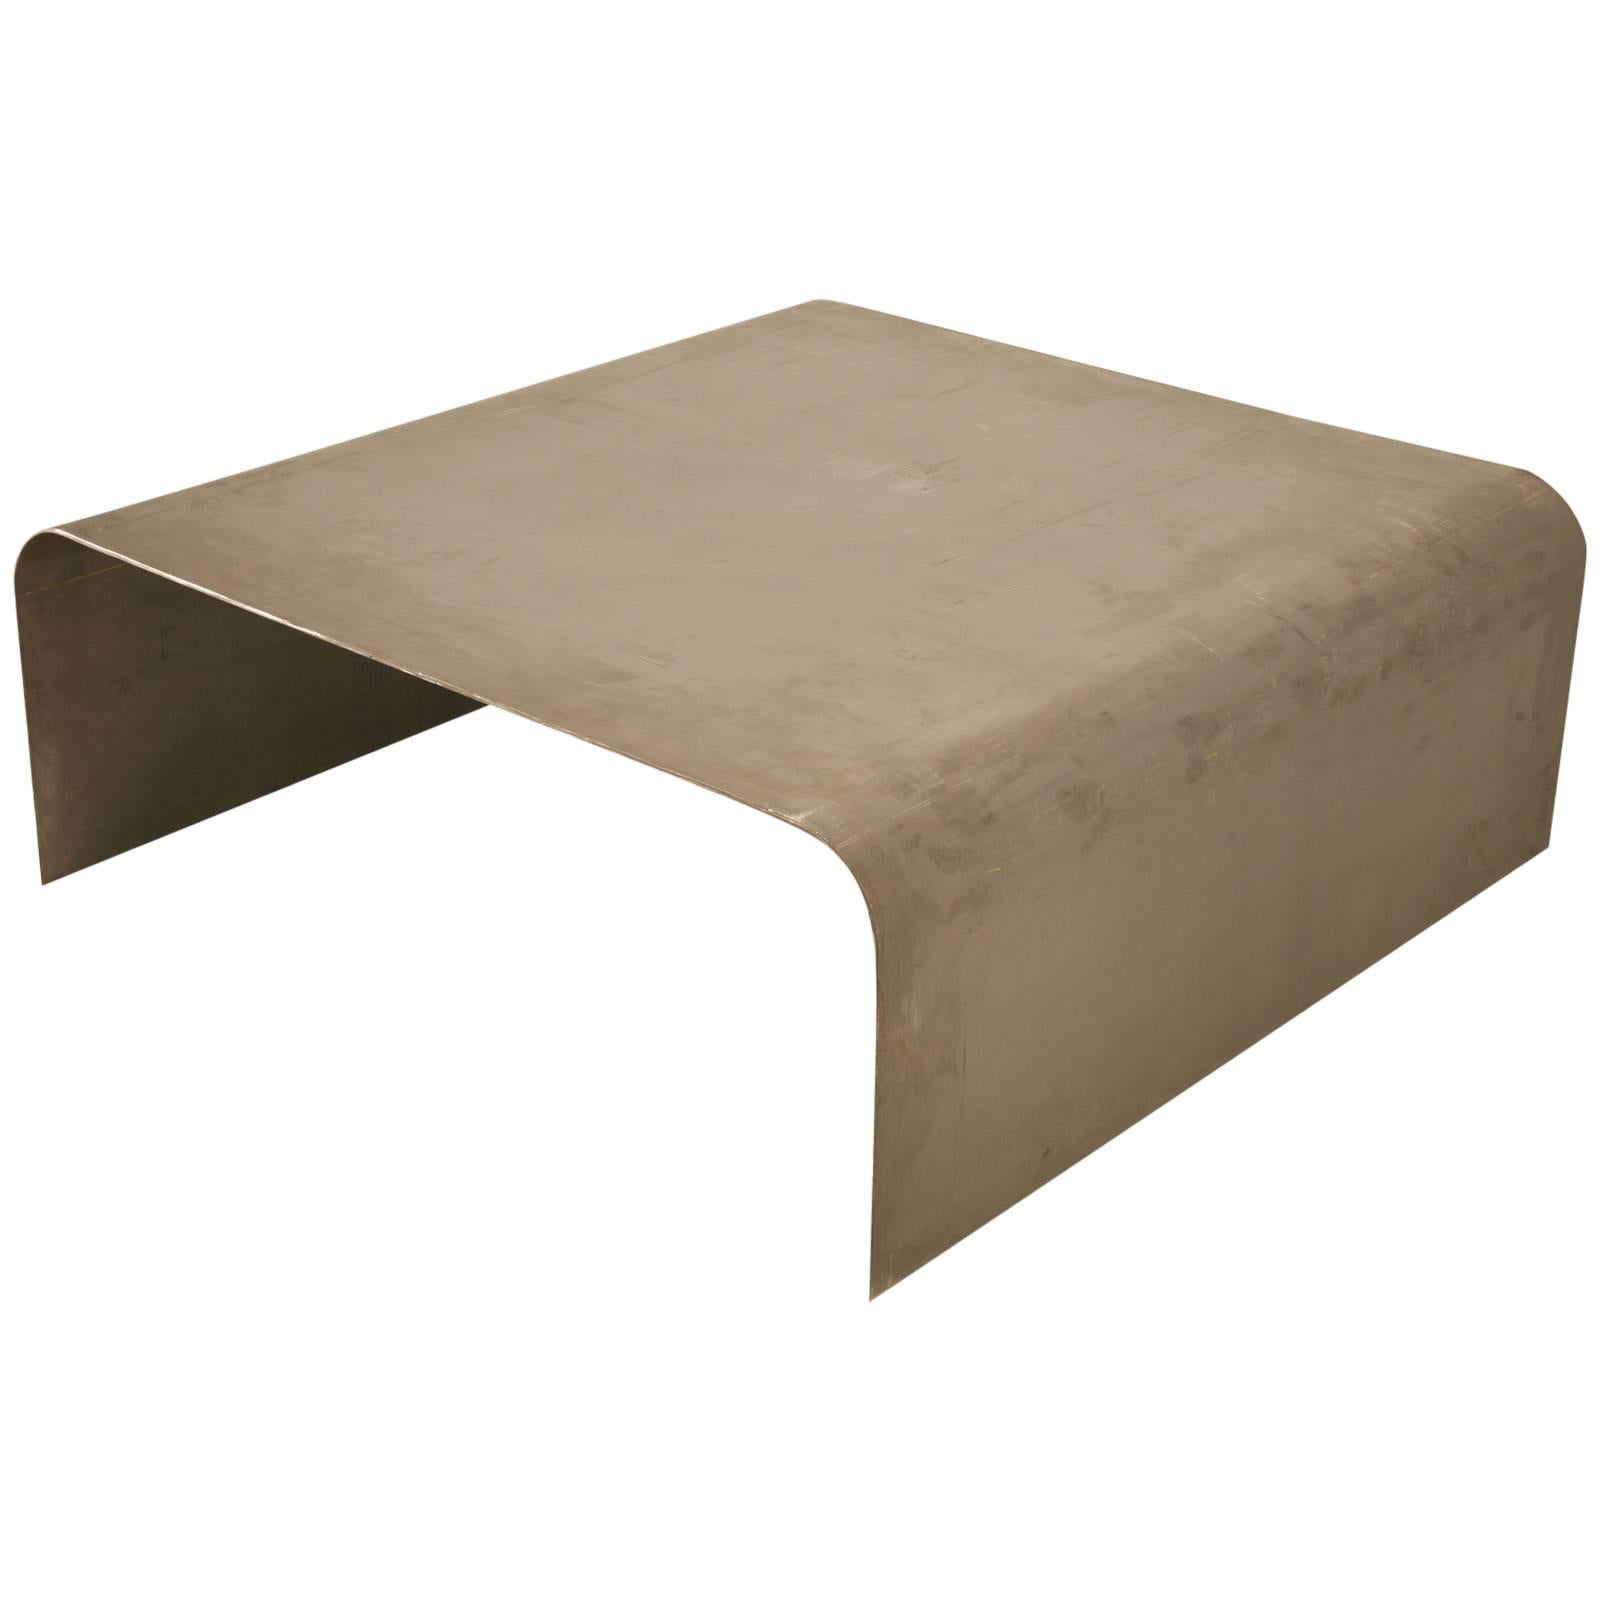 Steel Coffee Table Available in Optional Sizes, Finishes by Old Plank Very Heavy For Sale